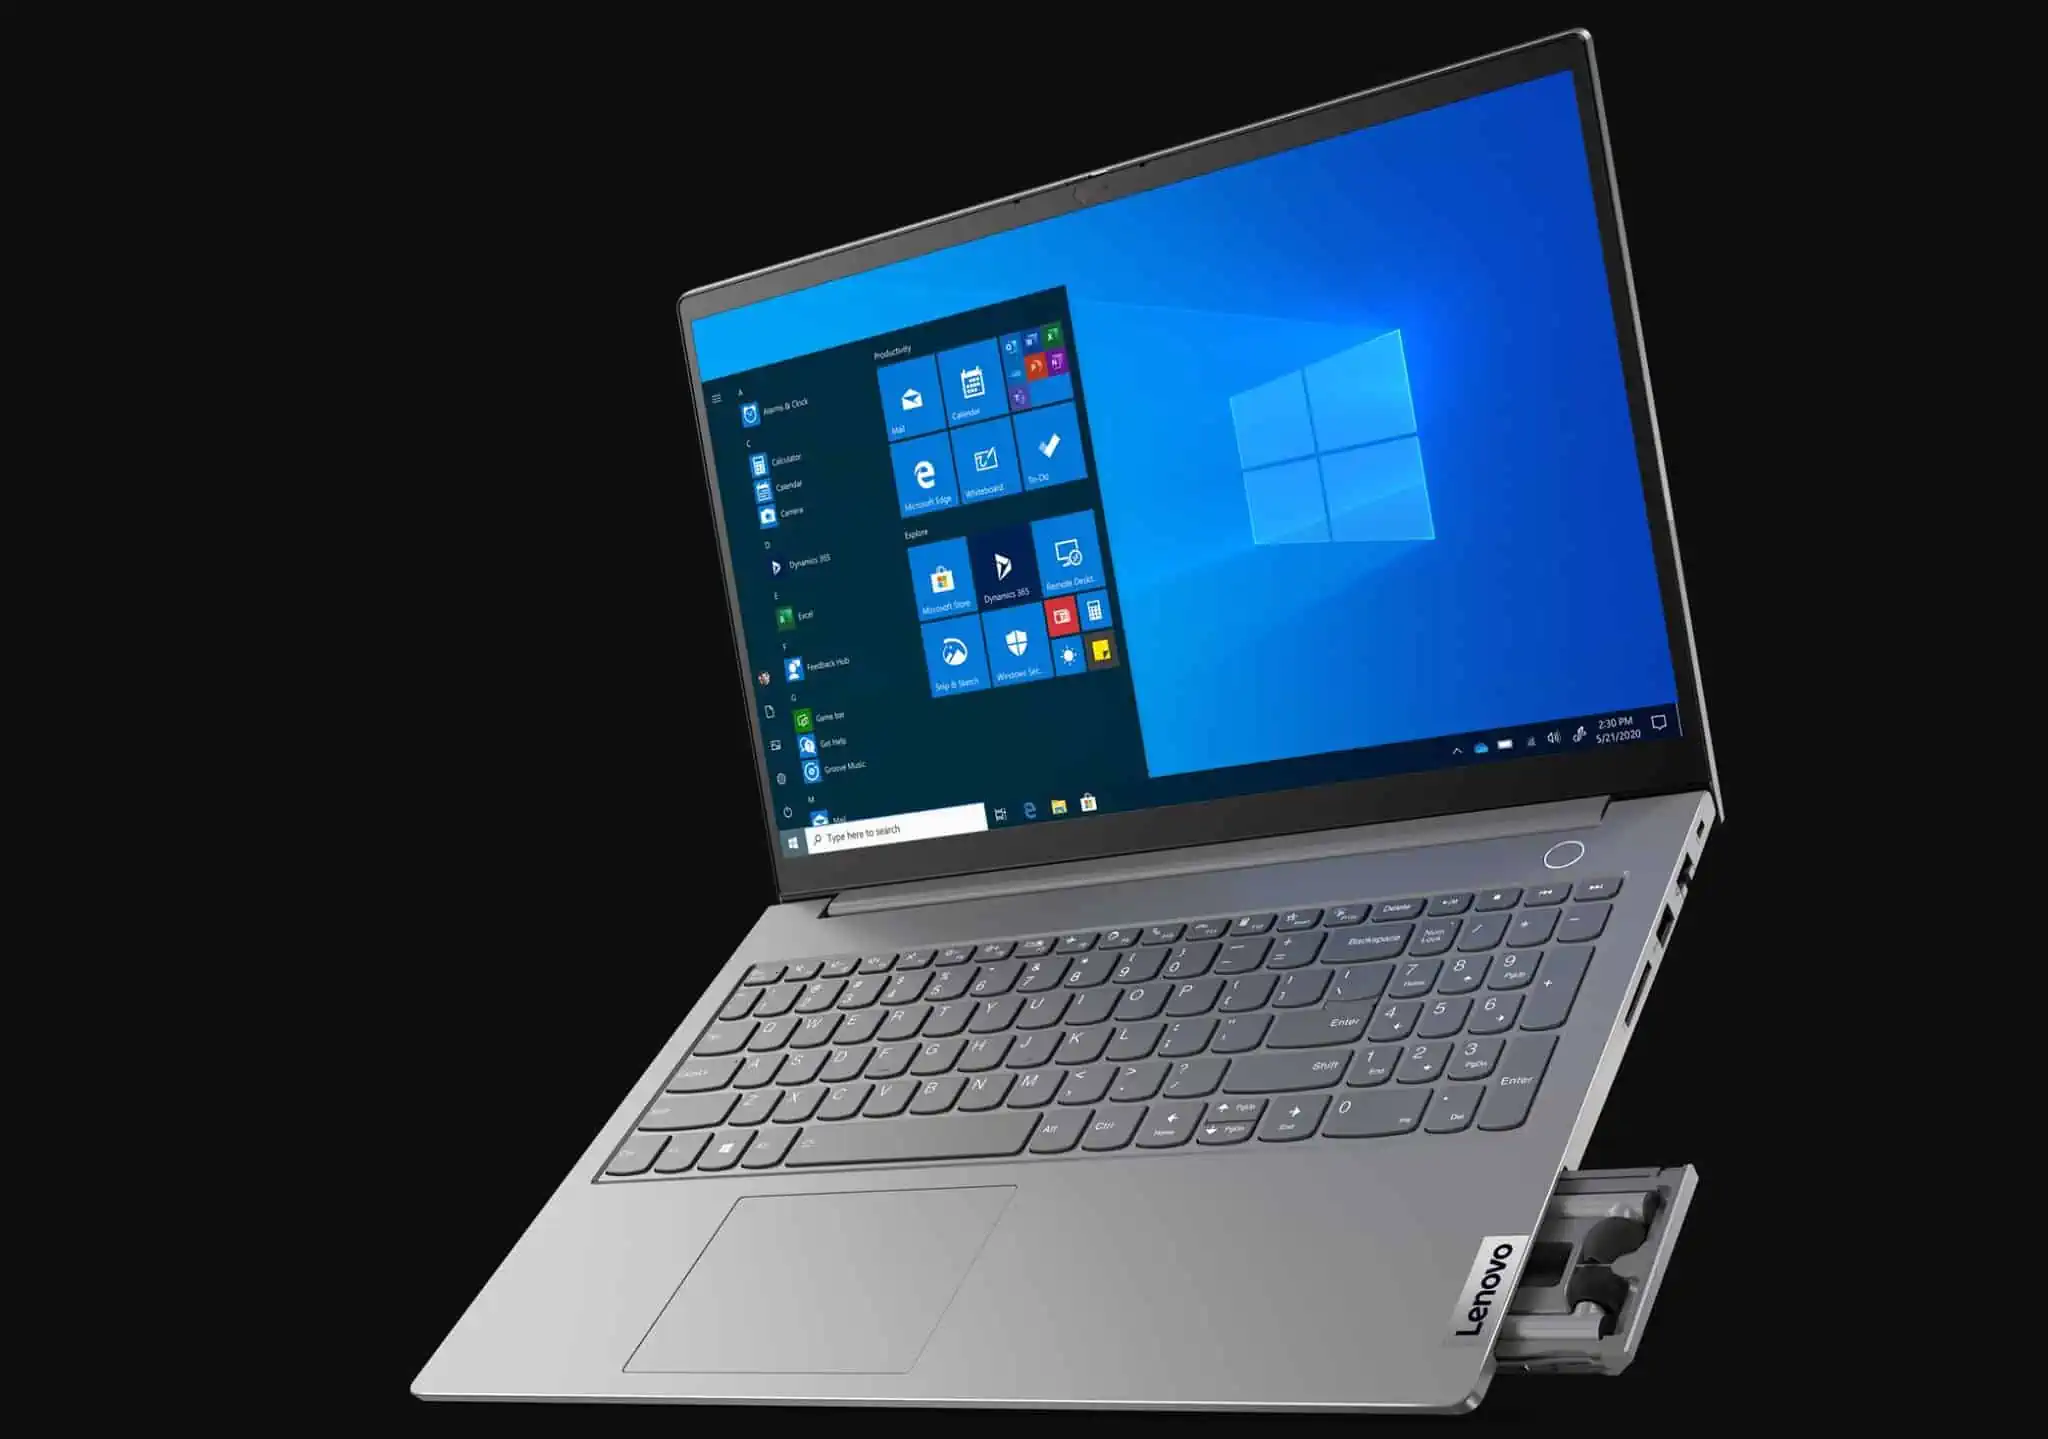 Lenovo's latest ThinkBook 15 laptop comes with integrated wireless